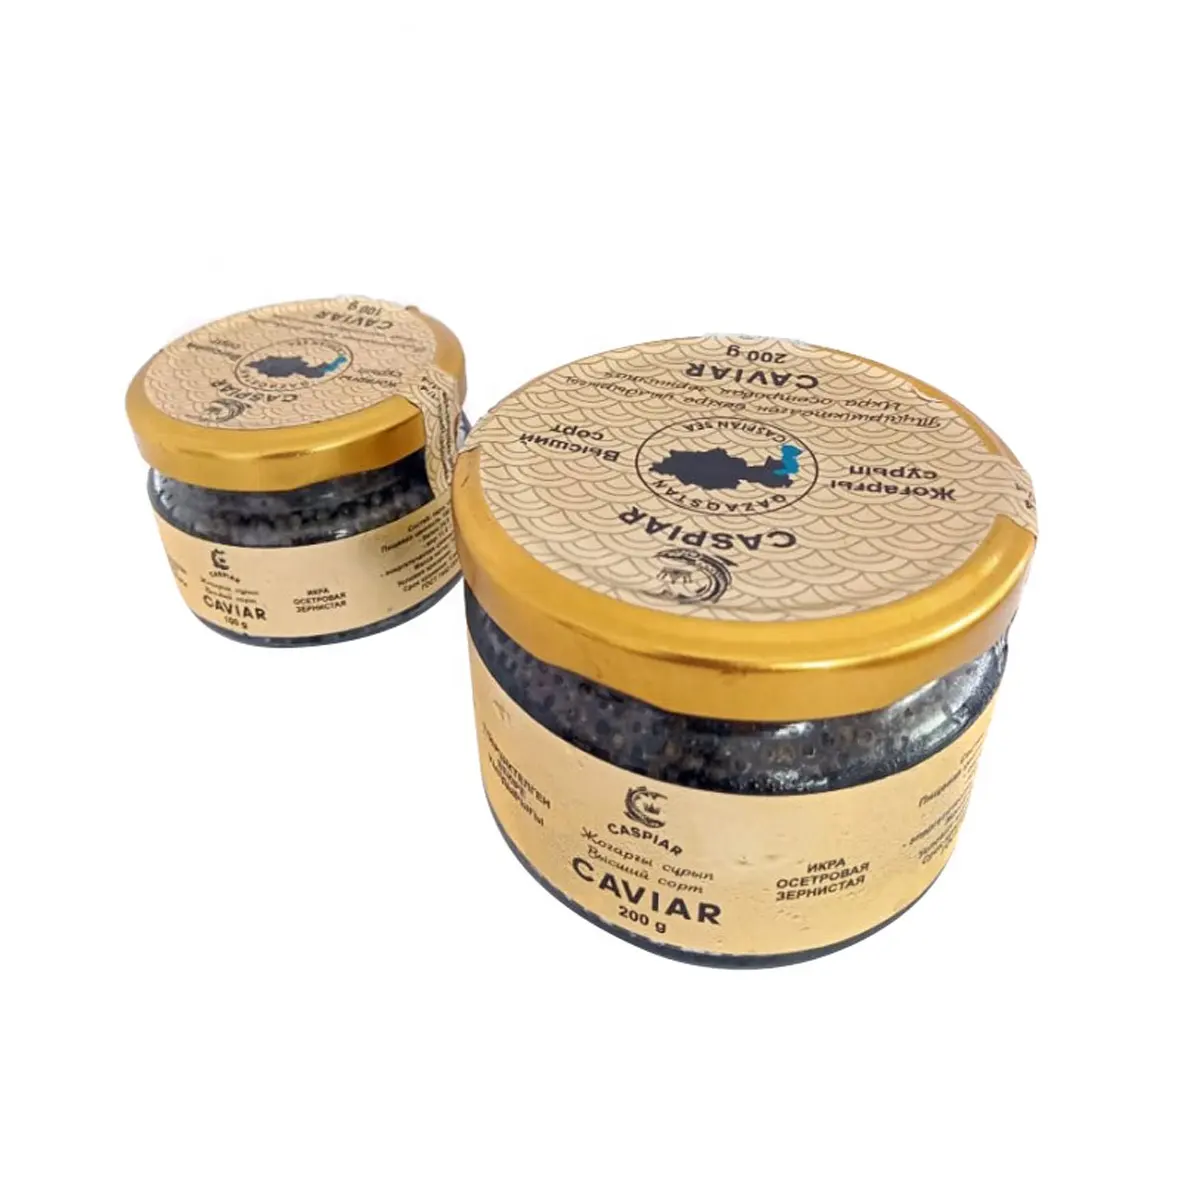 Gourmet farmed sturgeon caviare packaged in jar from manufacturer